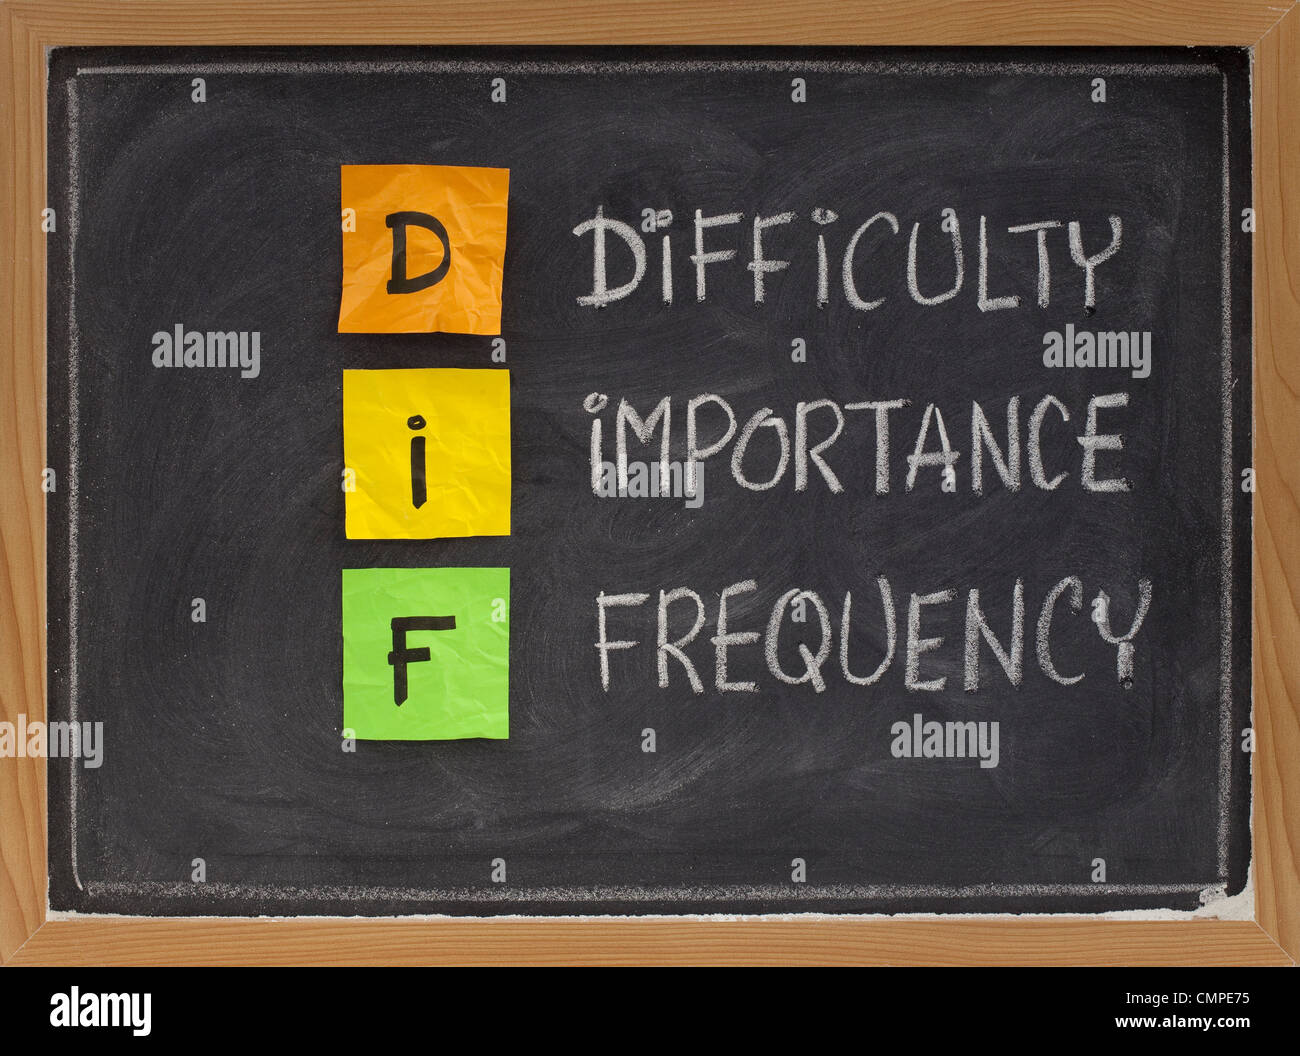 difficulty, importance, frequency - DIF analysis, a method of assessing performance, prioritizing training needs and planning Stock Photo